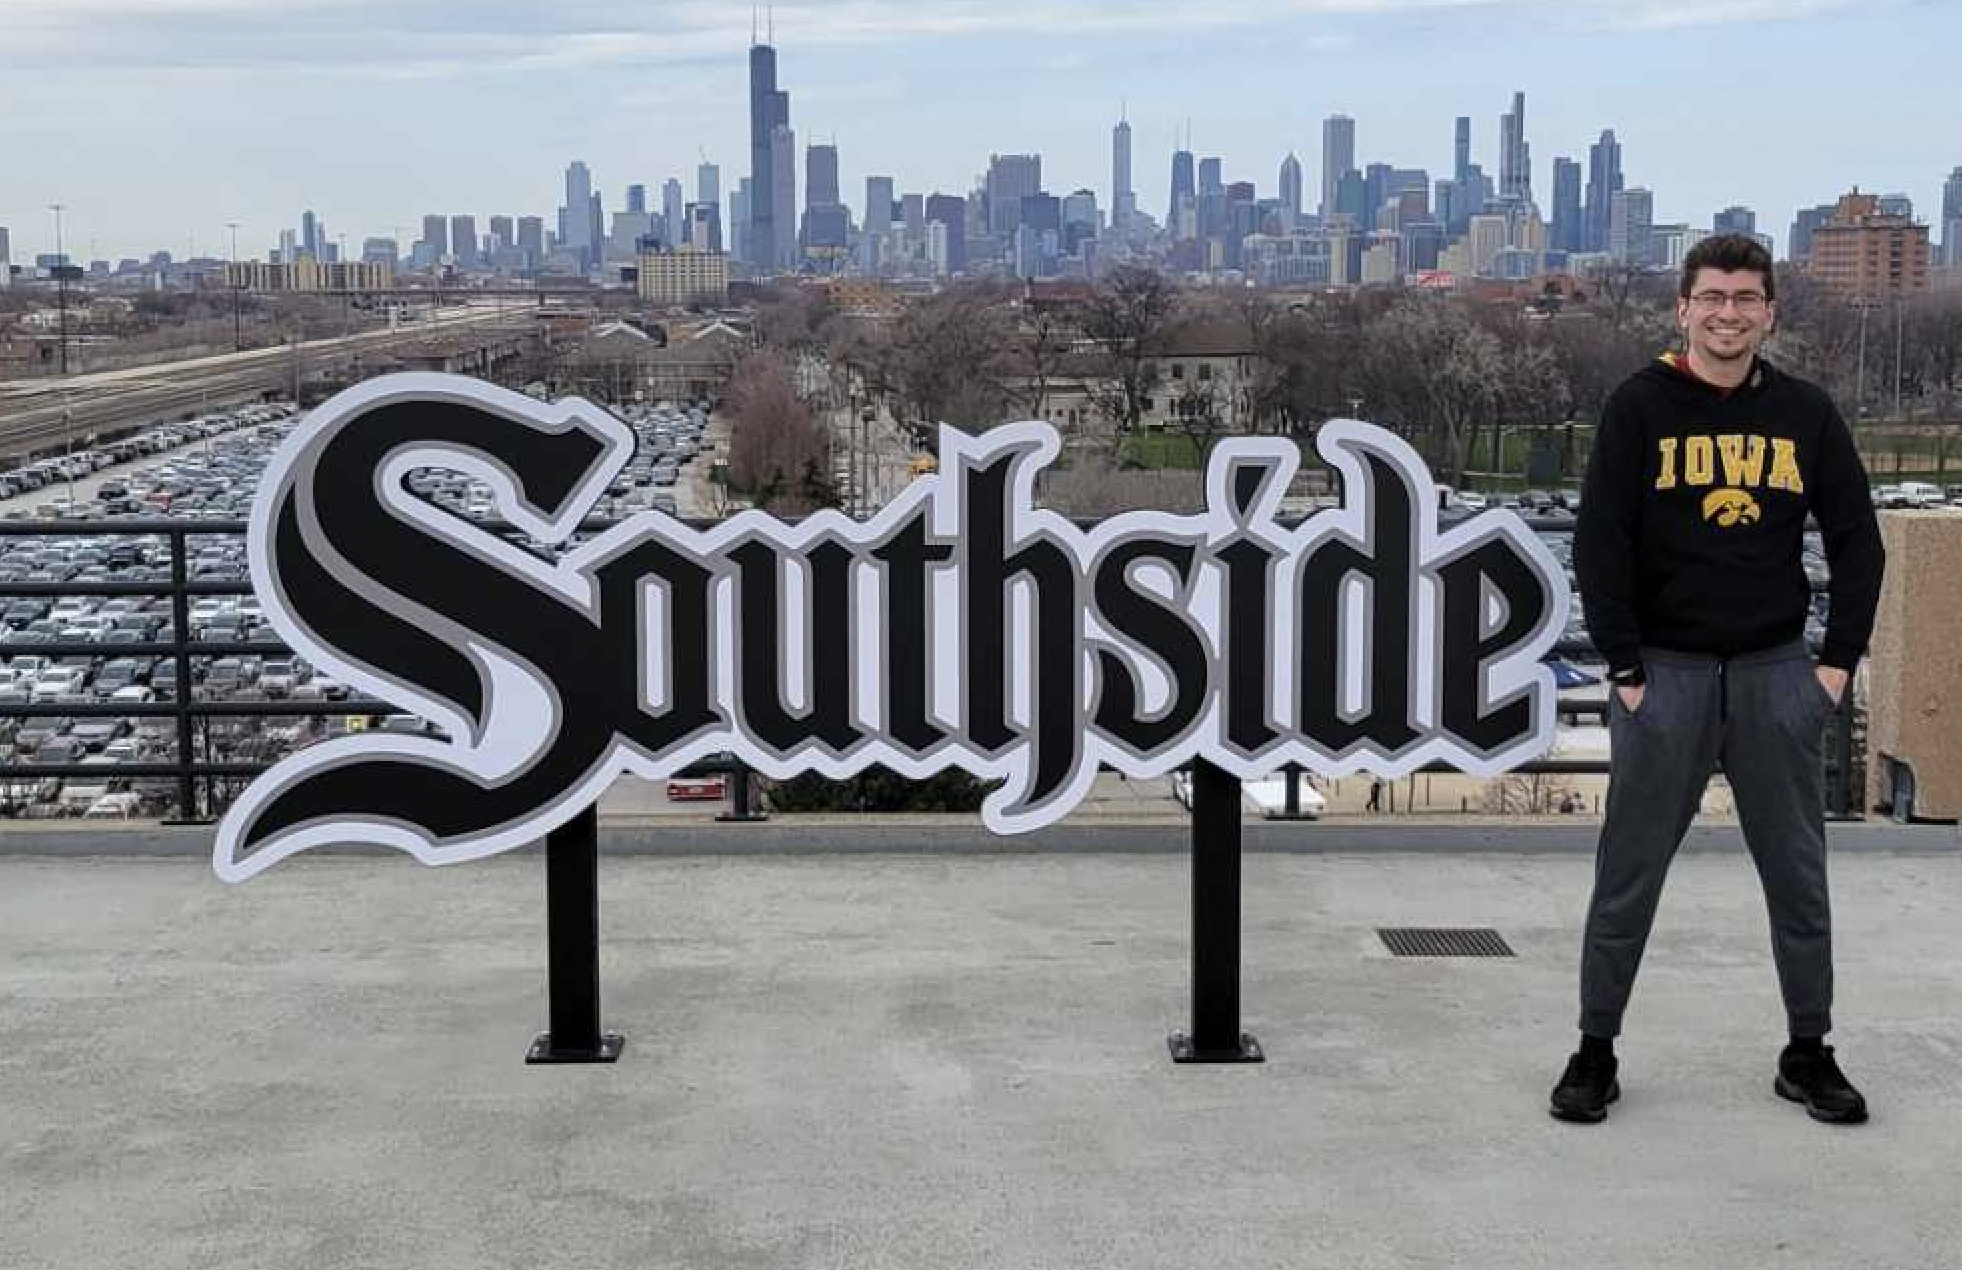 A man in an Iowa sweater poses next to a large sign that says, "Southside."